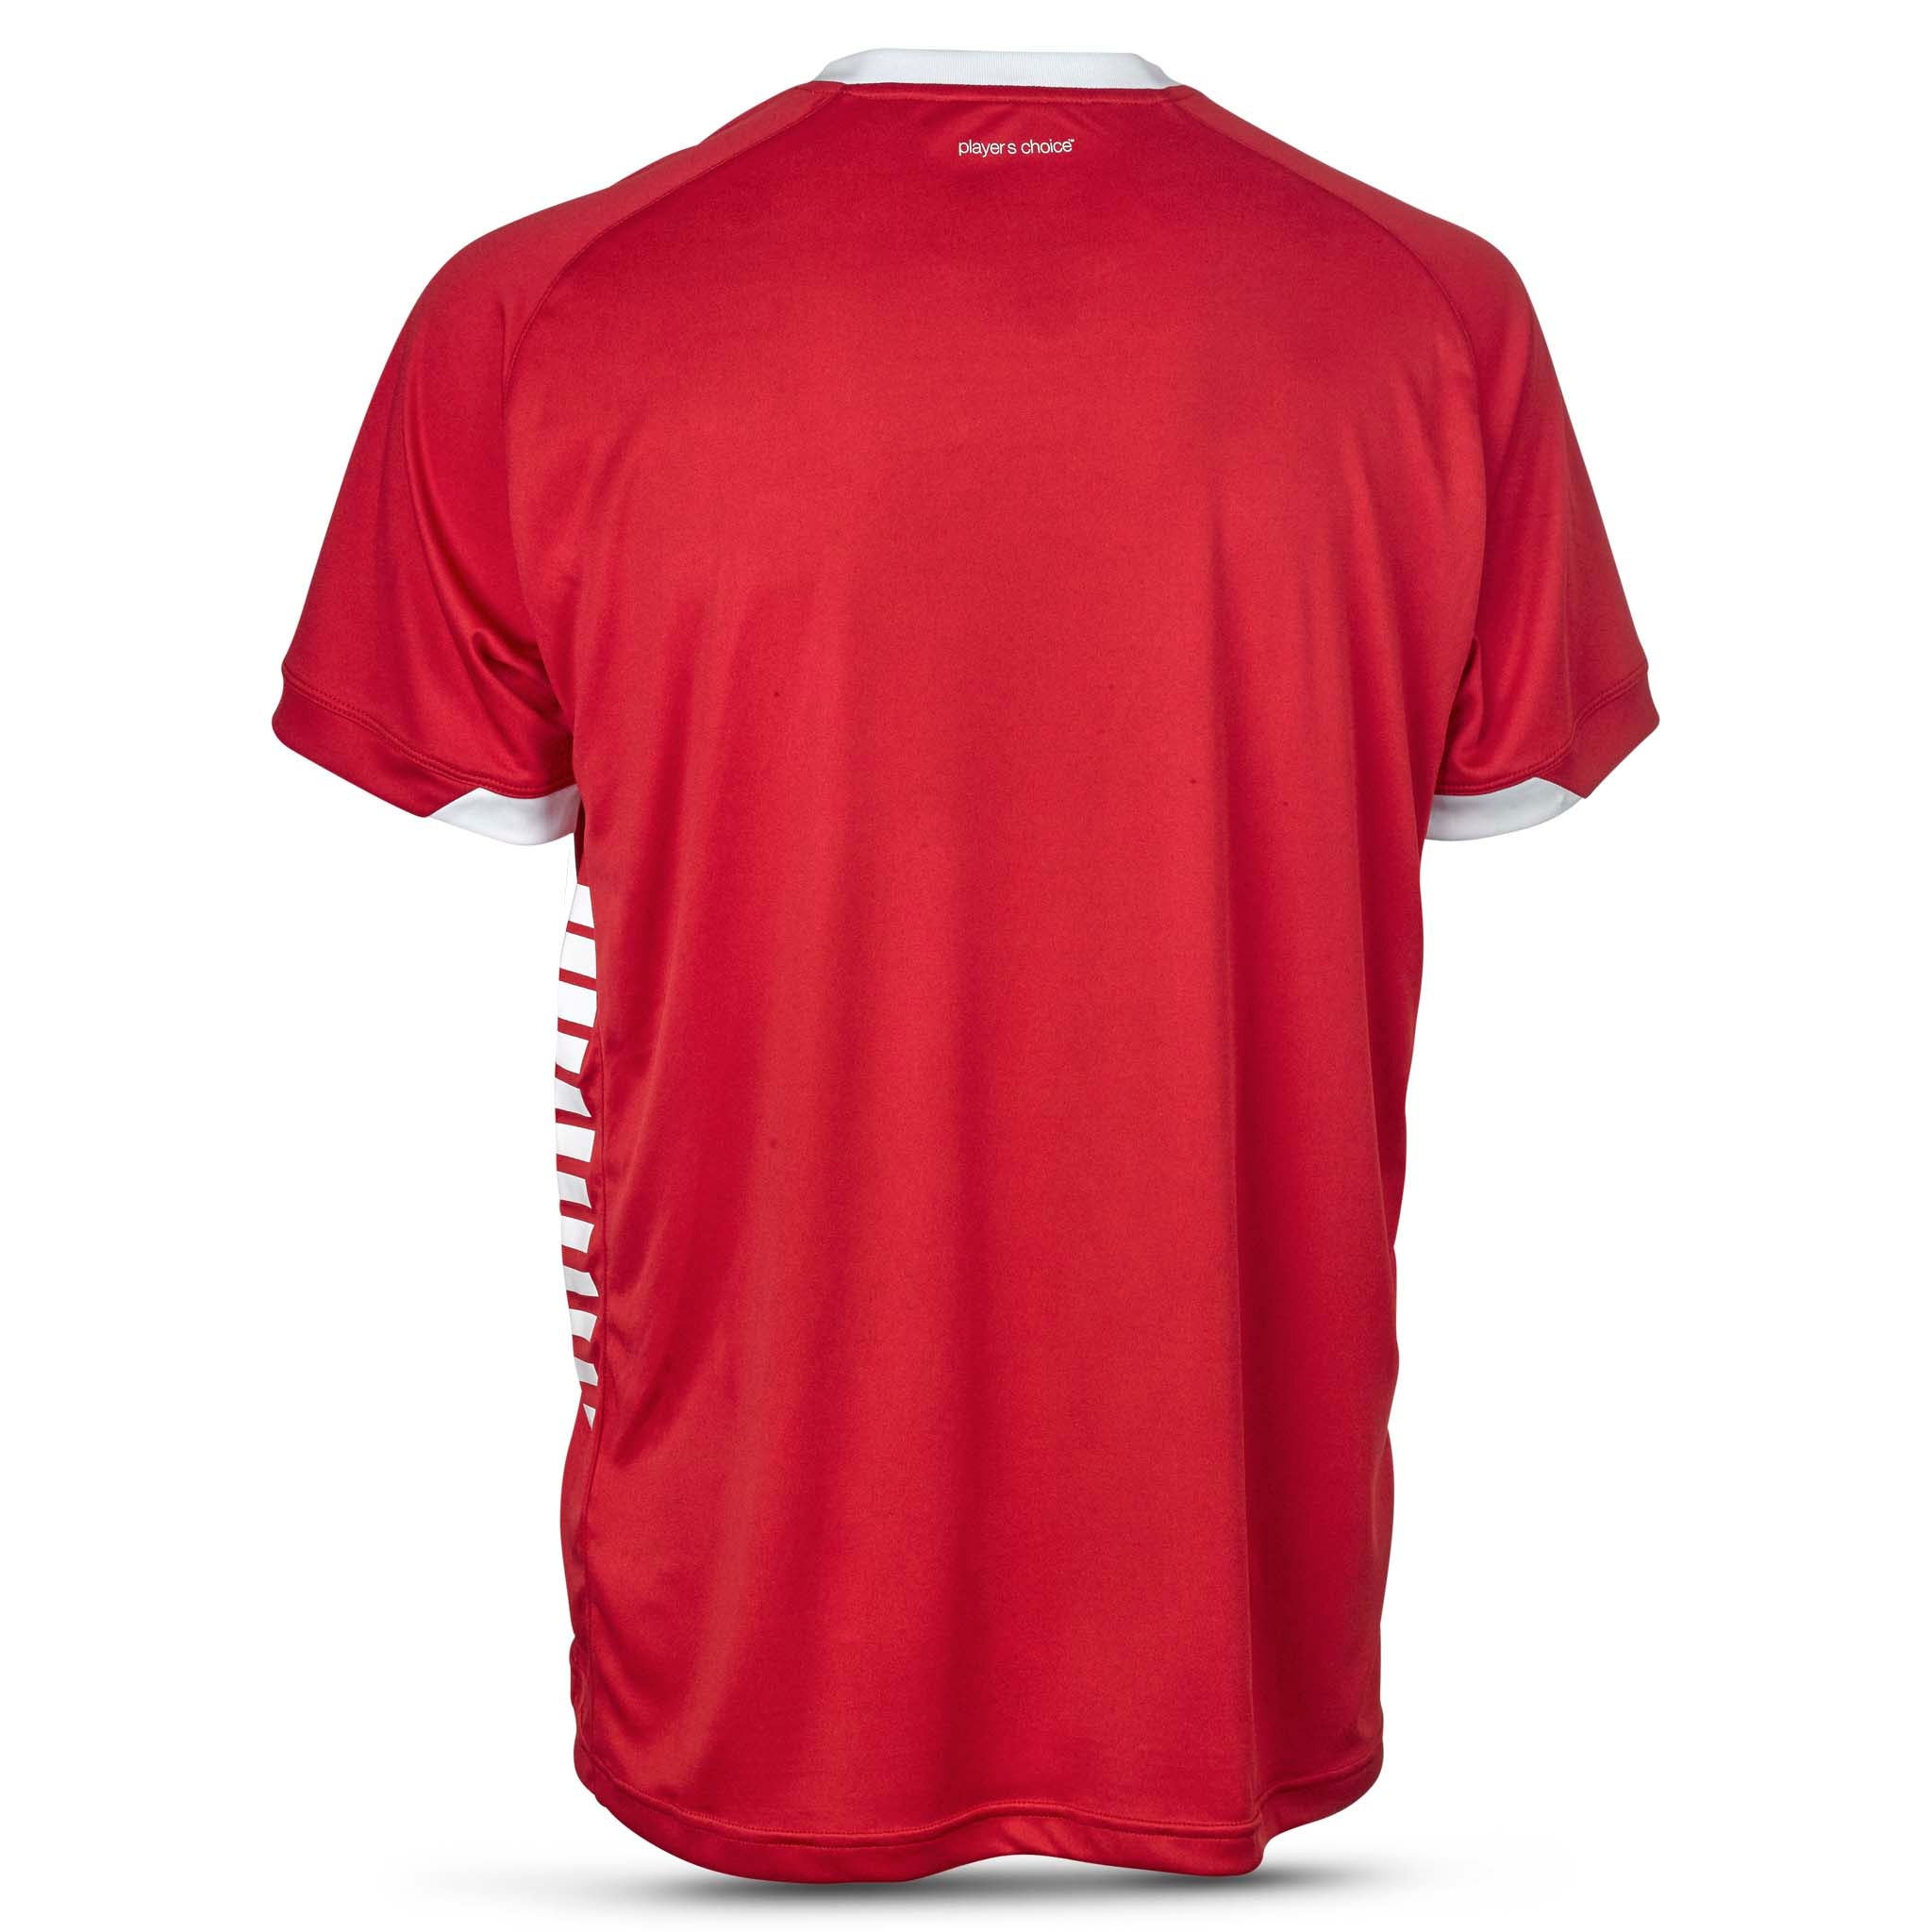 Spain Short Sleeve player shirt #colour_red